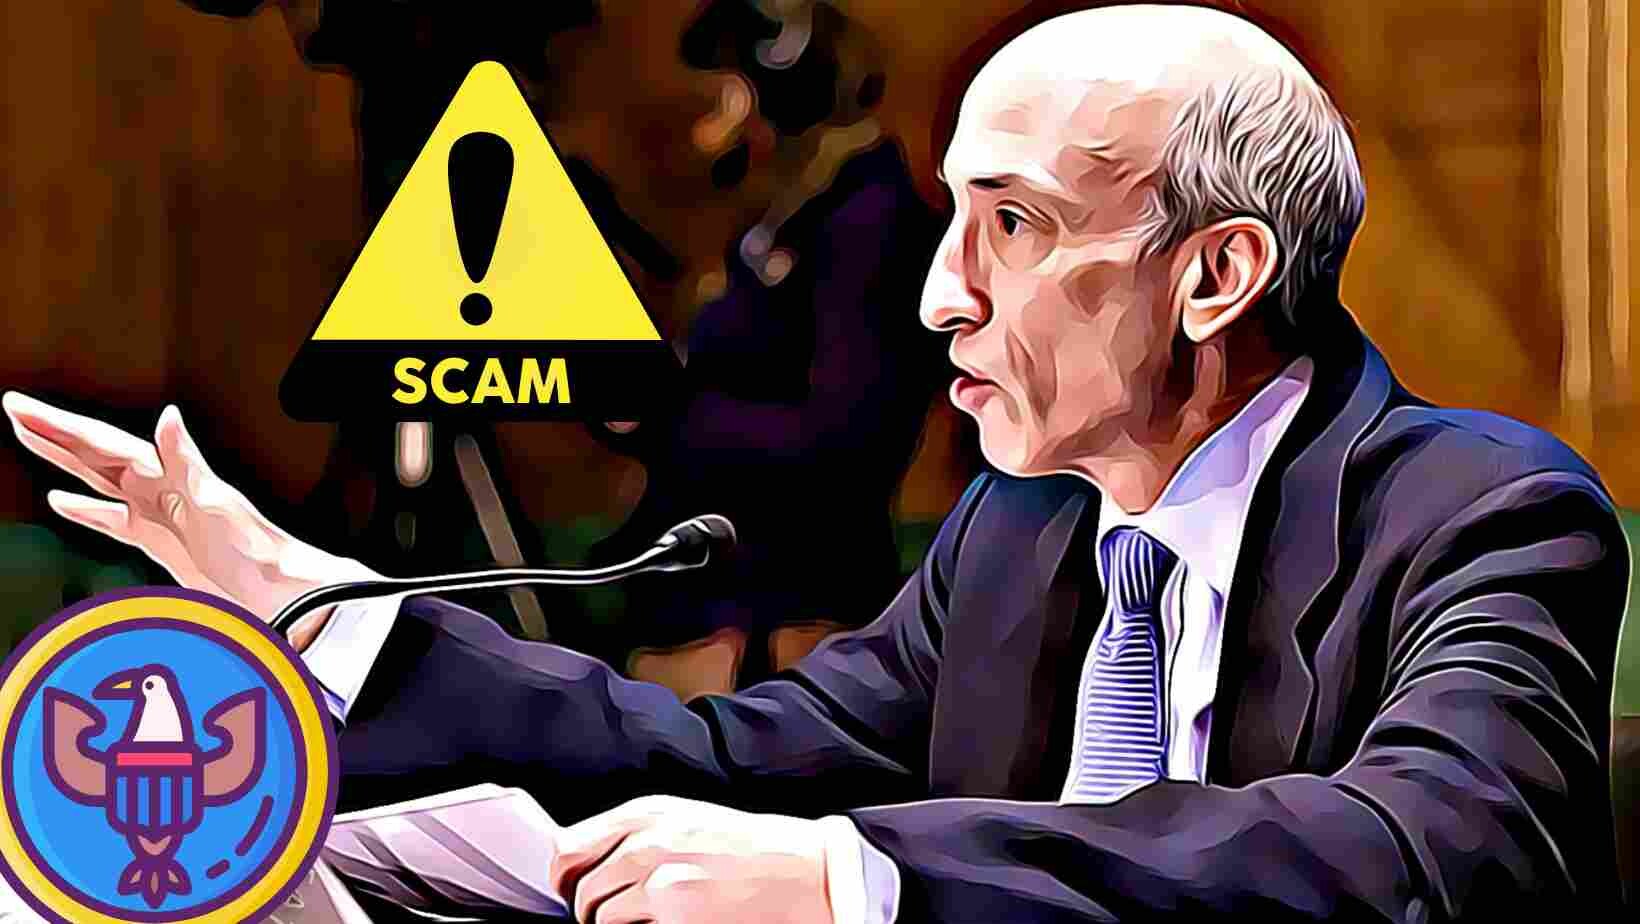 CRYPTONEWSBYTES.COM SEC-Fraud-Gary SEC Chair Gary Gensler says crypto is all "hucksters, fraudsters, scam artists" - Piper Sandler Global Exchange  